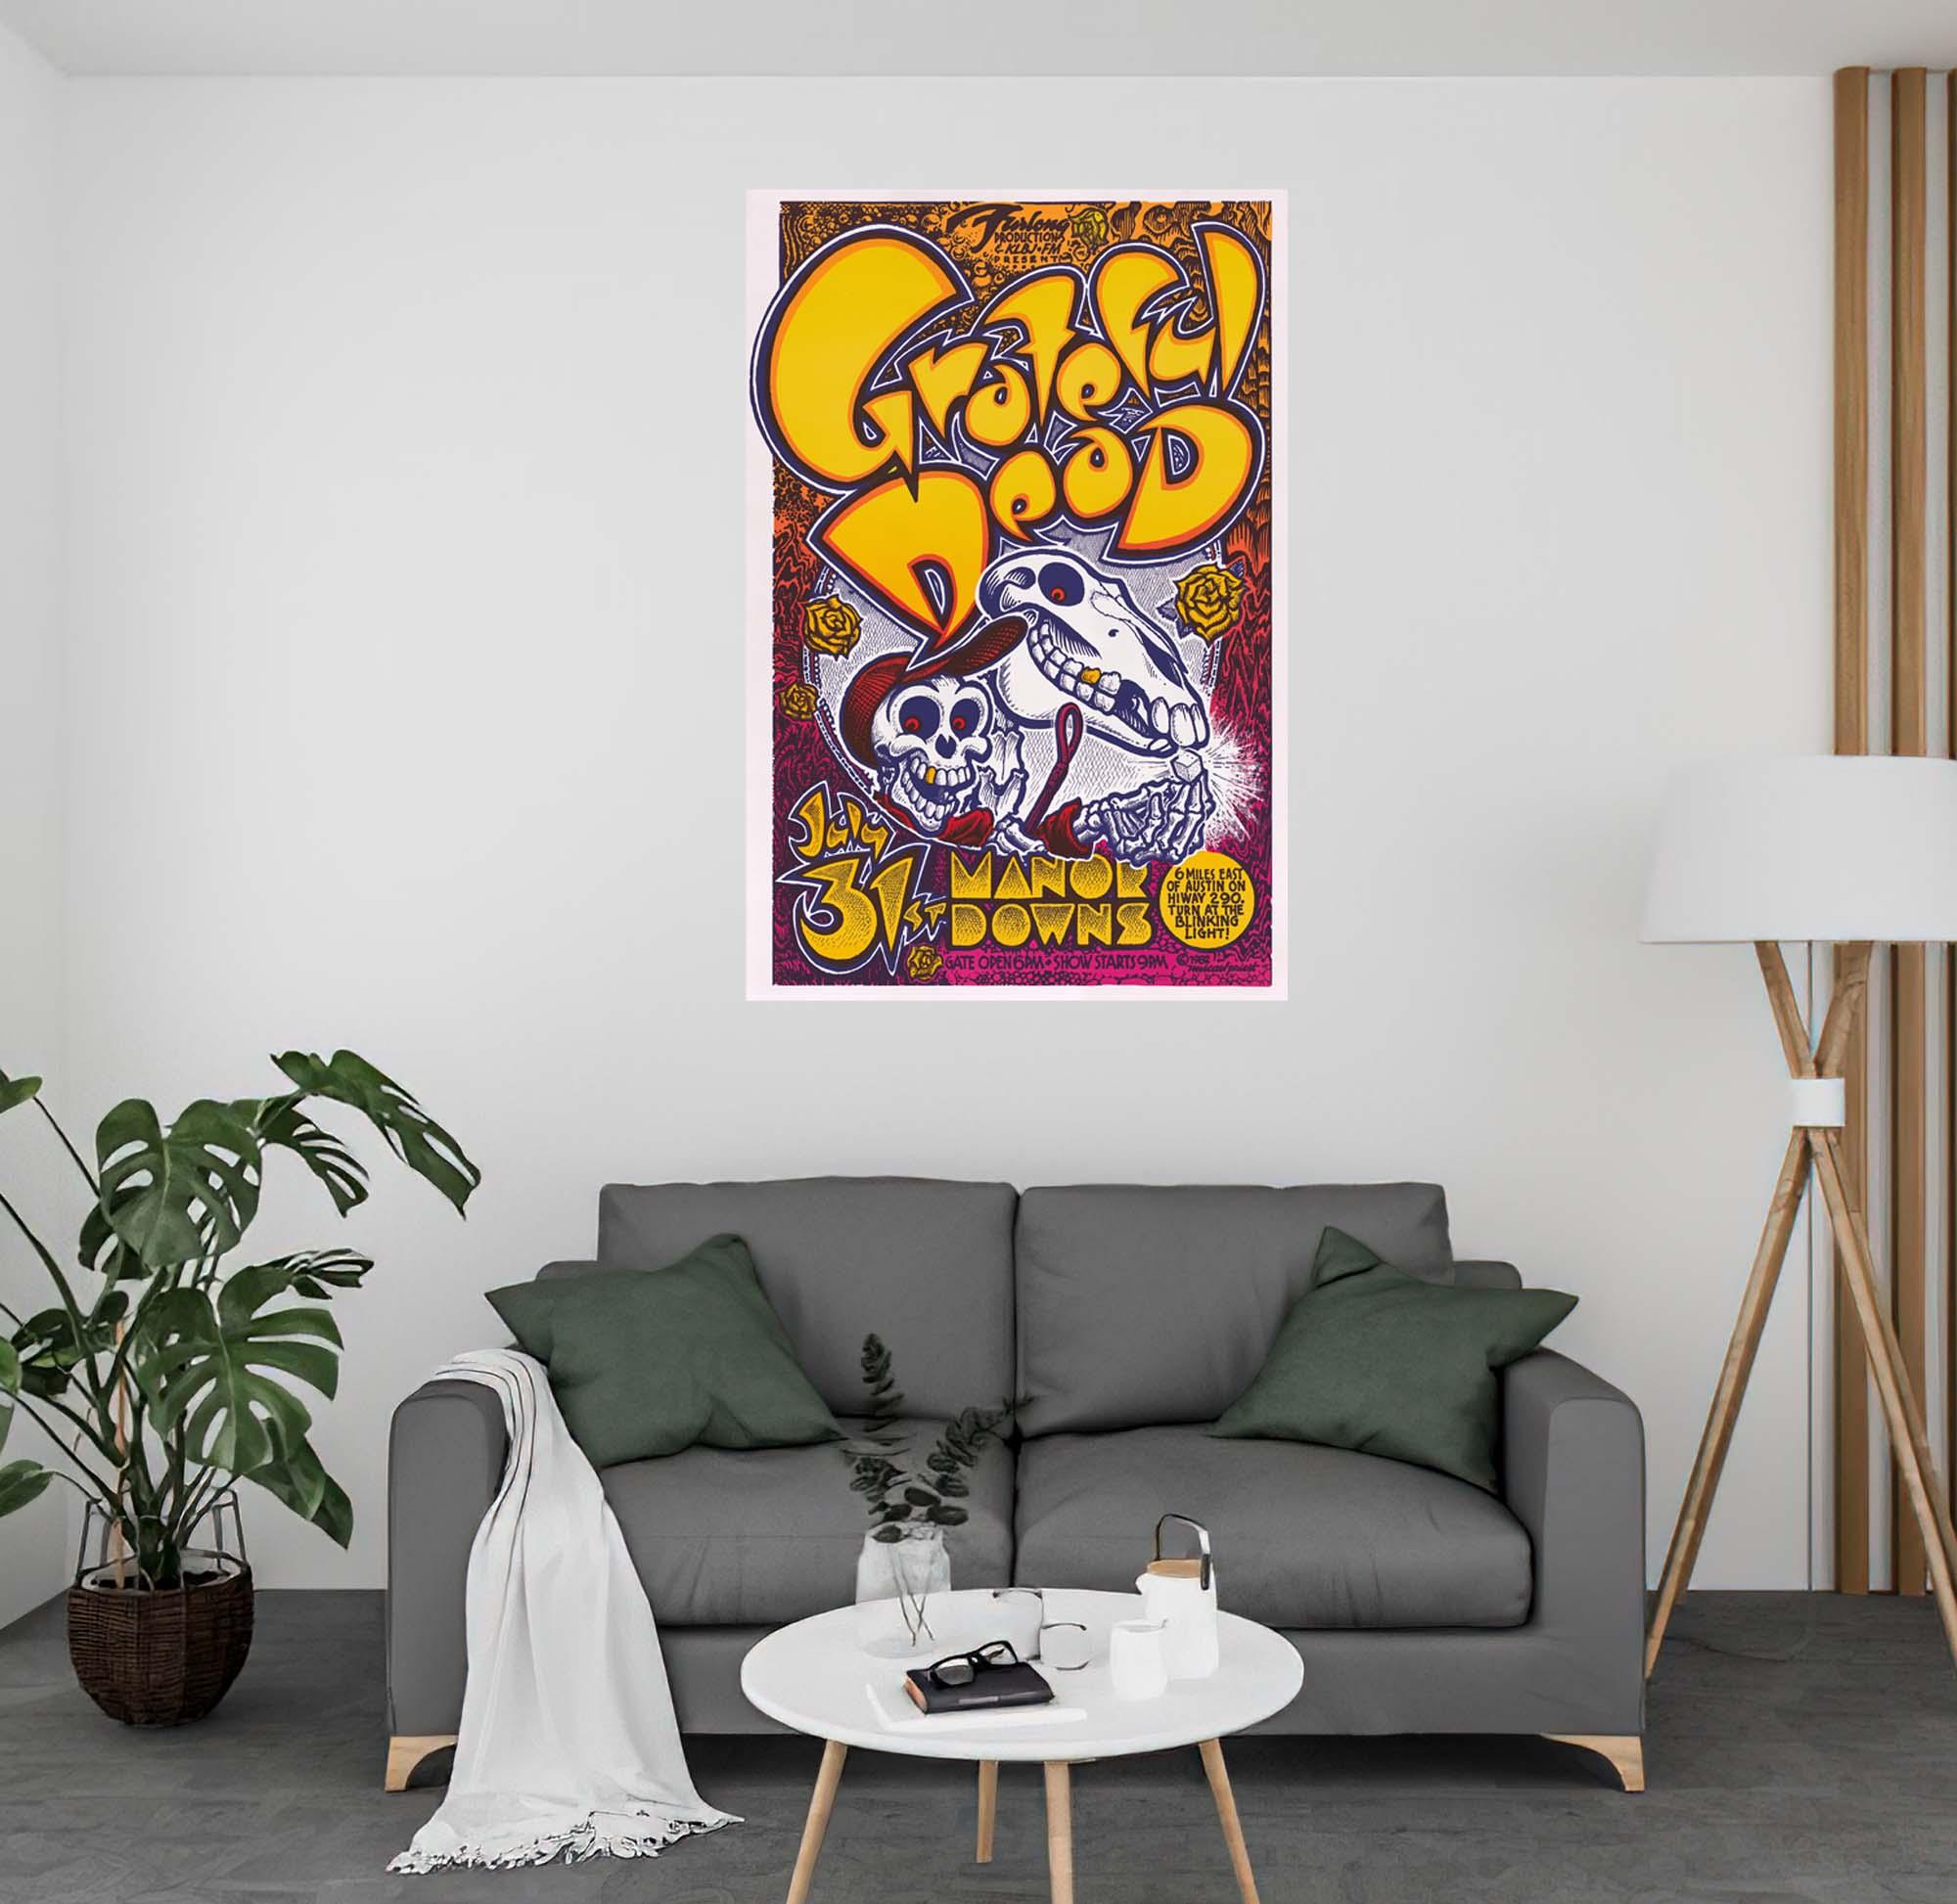 CoolWalls.ca Posters, Prints, & Visual Artwork Grateful Dead Vintage Poster: Peel_n_Stick onto the wall, wallpaper like fabric